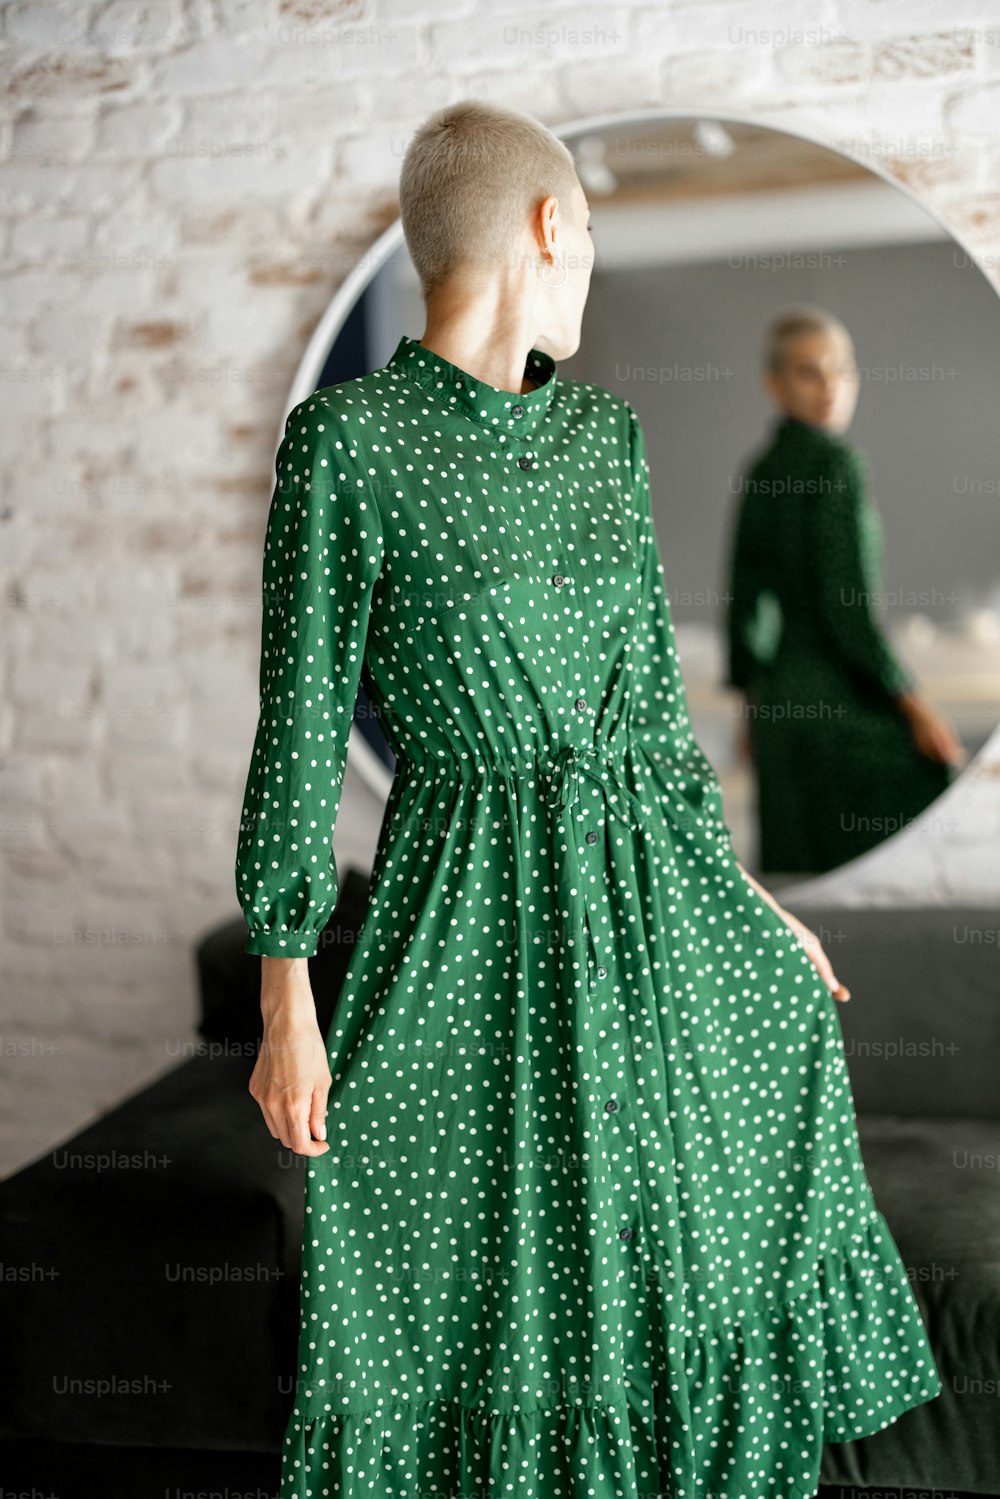 Stylish woman in green dress looks at herselfes in the mirror, getting ready to go out. Female style and beauty concept